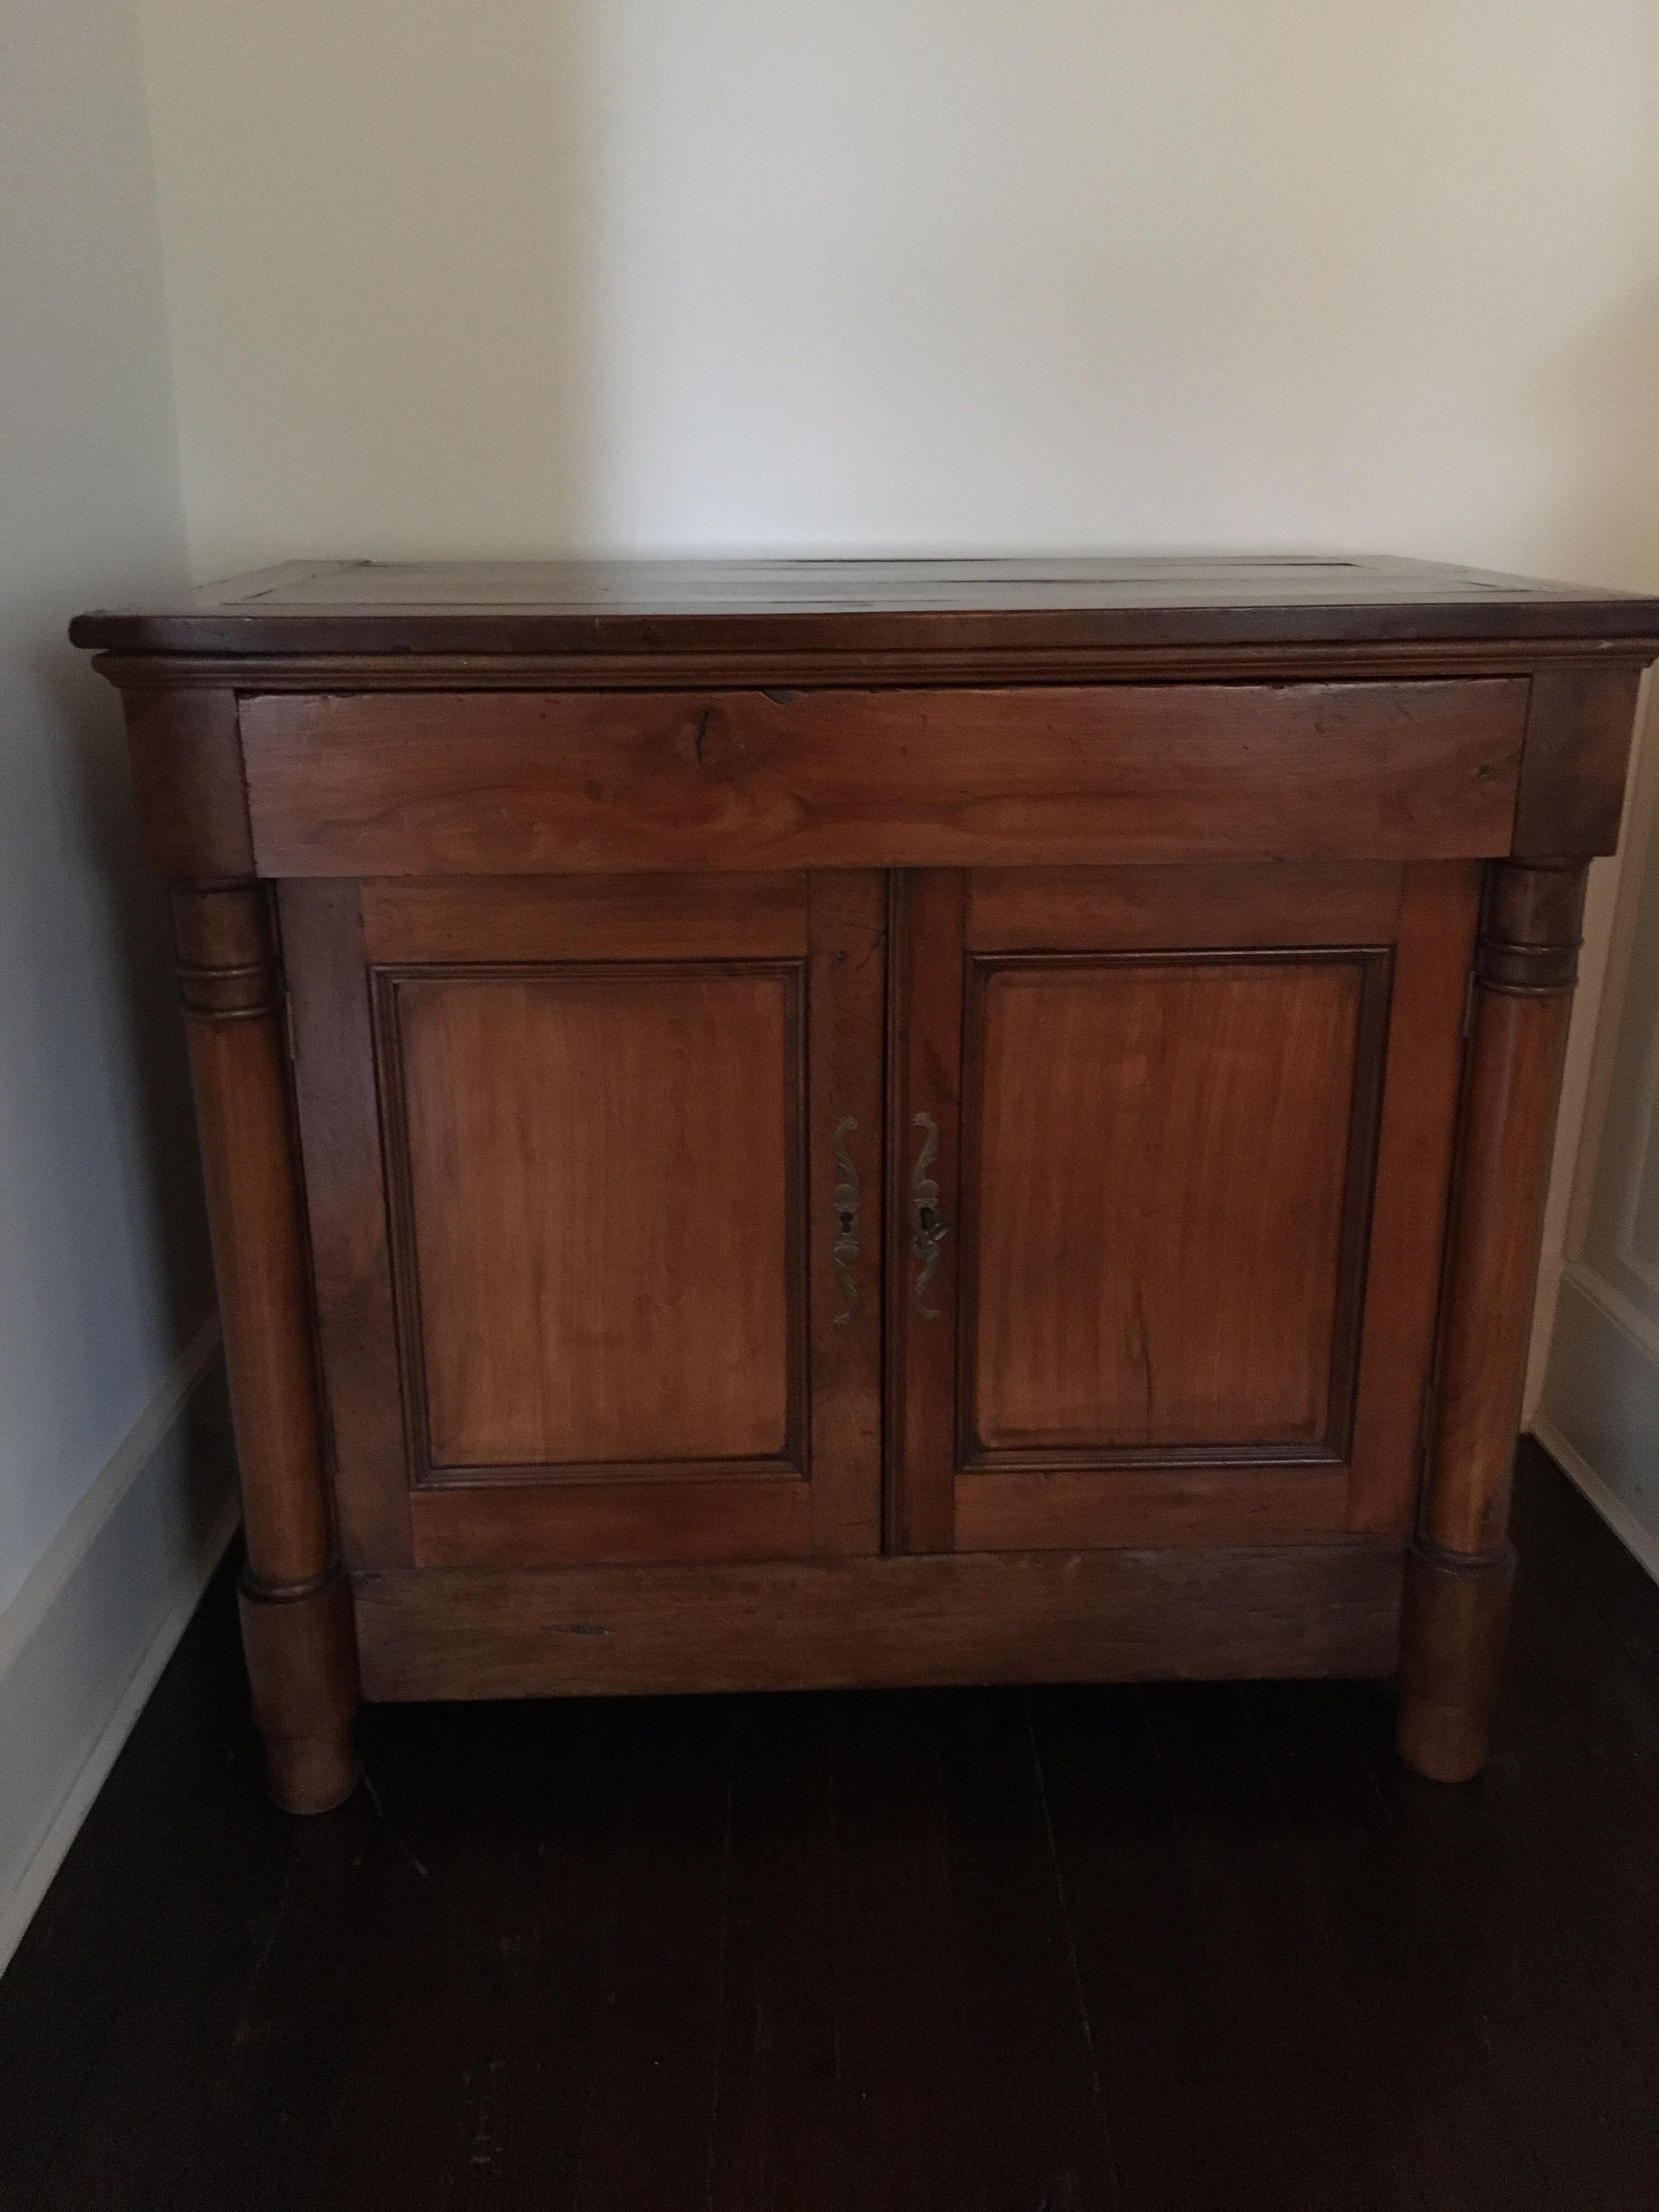 19th century French Empire walnut sideboard. Single drawer and two doors with a single shelf below.
Original hardware and key.